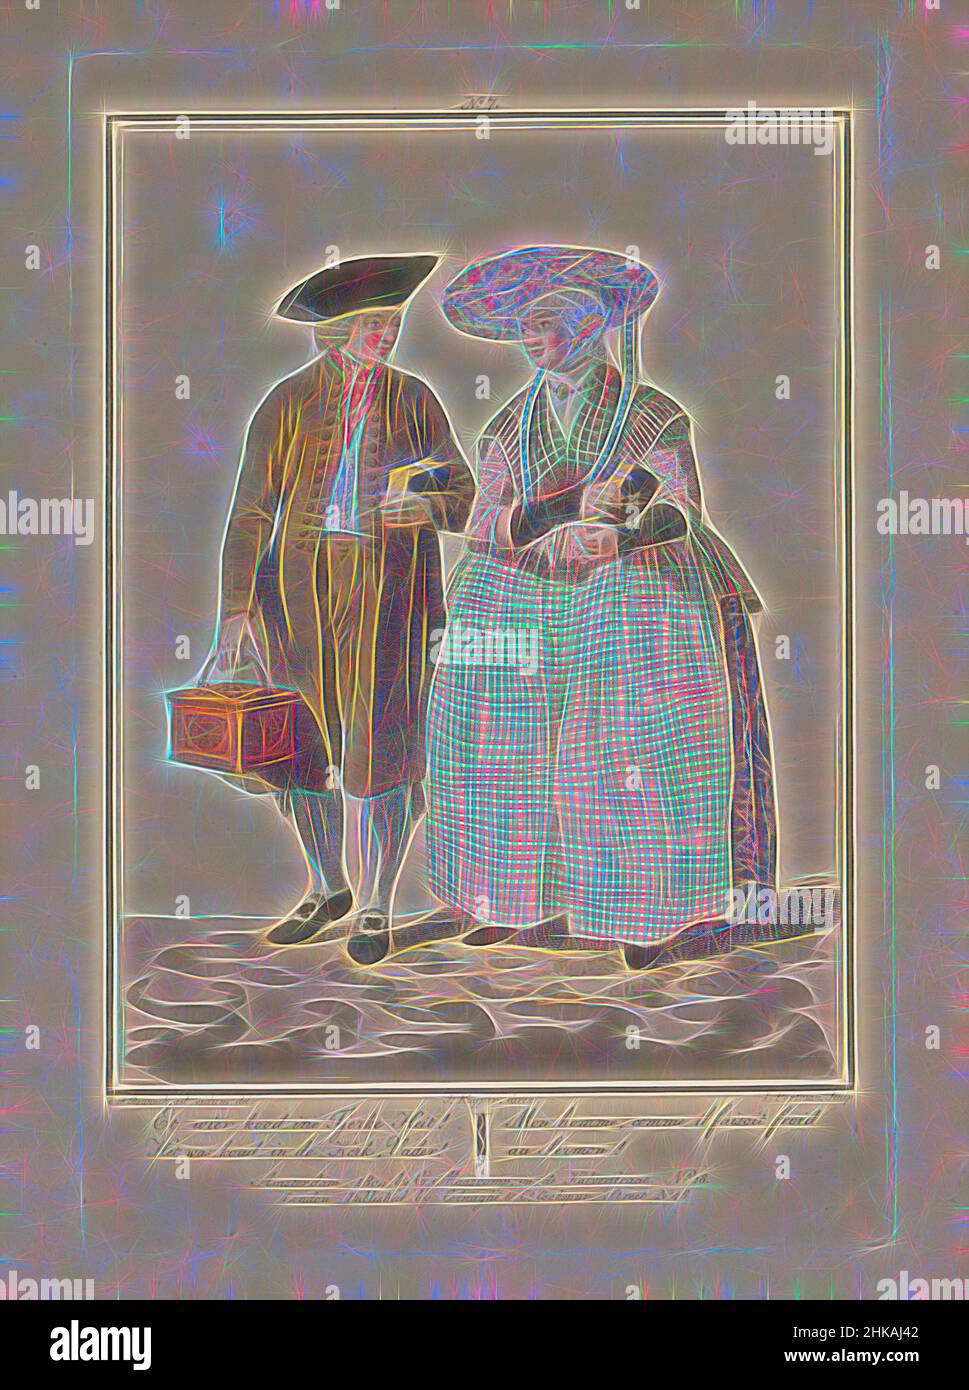 Inspired by Fishing couple from Friesland, Et wier kood ine Tjerke Heit ! It was cold in the Church, Father !, Mon homme, comme il faisoit froid au Sermon!, A Frisian boatman and his wife coming out of church with Bibles in hand. The man is also carrying a stove. Second installment of four plates, Reimagined by Artotop. Classic art reinvented with a modern twist. Design of warm cheerful glowing of brightness and light ray radiance. Photography inspired by surrealism and futurism, embracing dynamic energy of modern technology, movement, speed and revolutionize culture Stock Photo